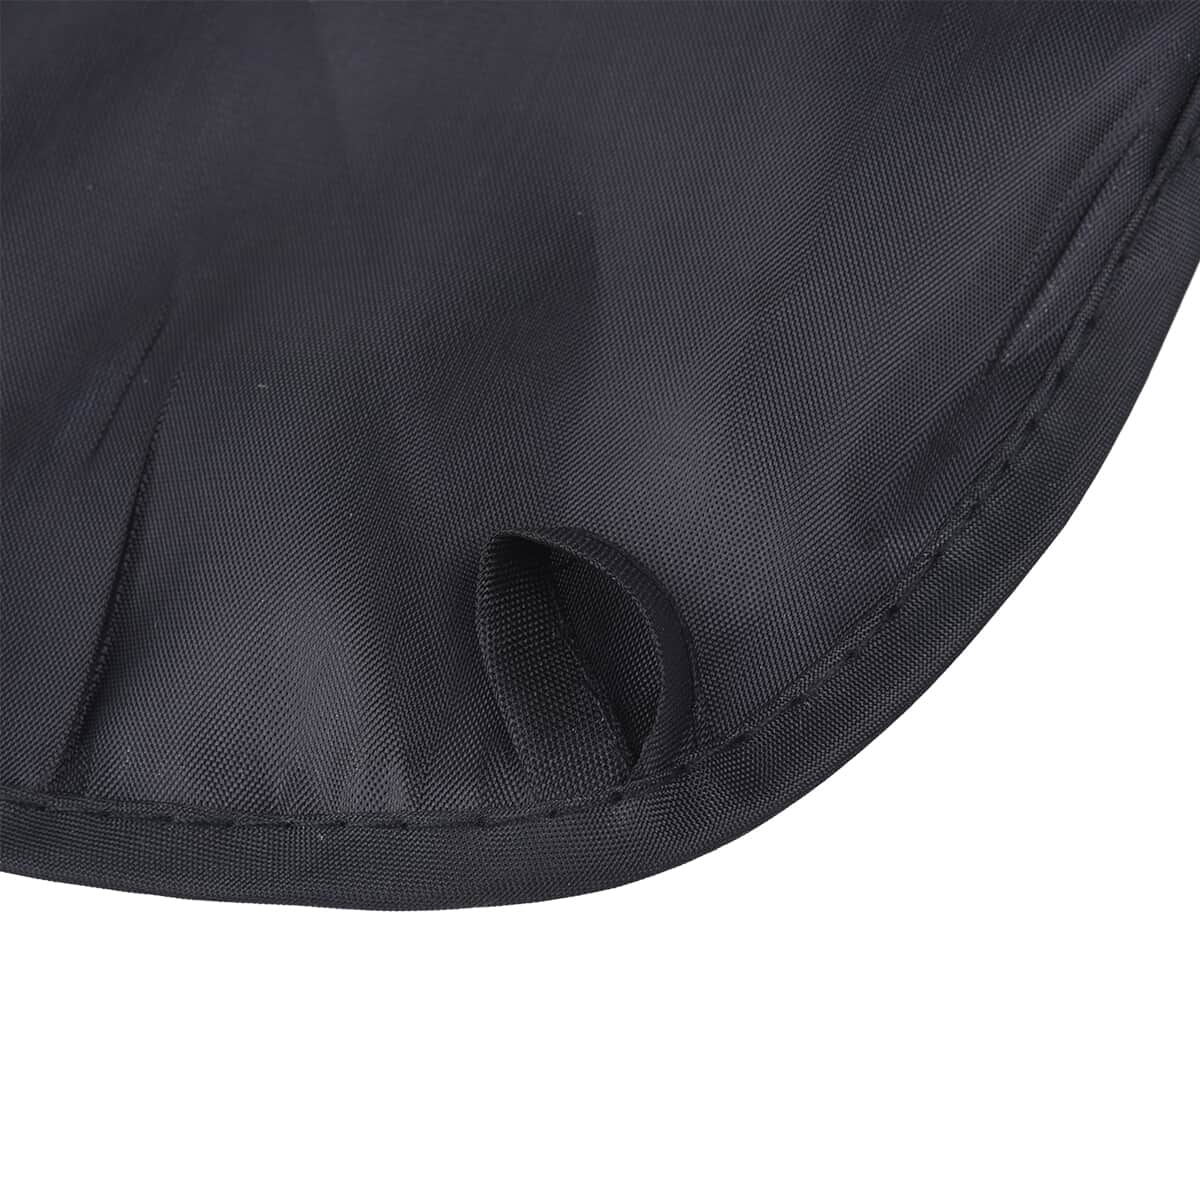 Male Beard Apron with 2 Suction Cup - Black image number 5